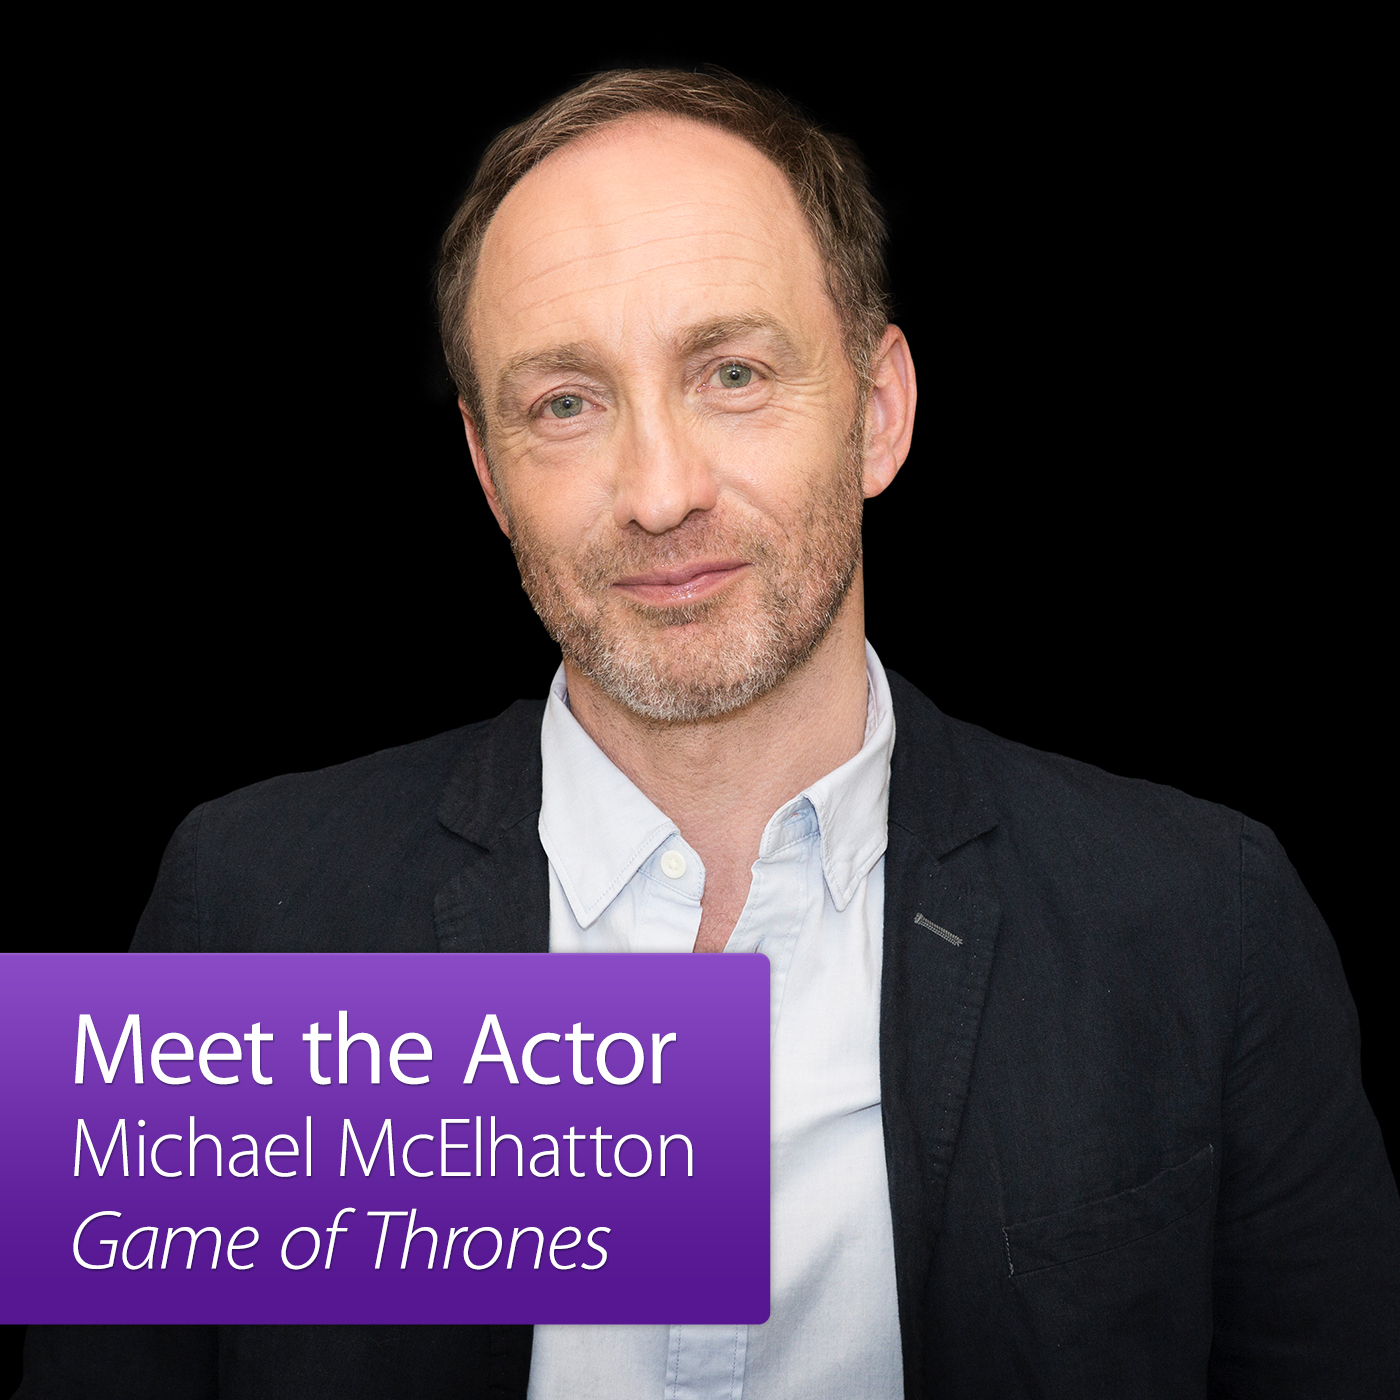 Michael McElhatton, Game of Thrones: Meet the Actor